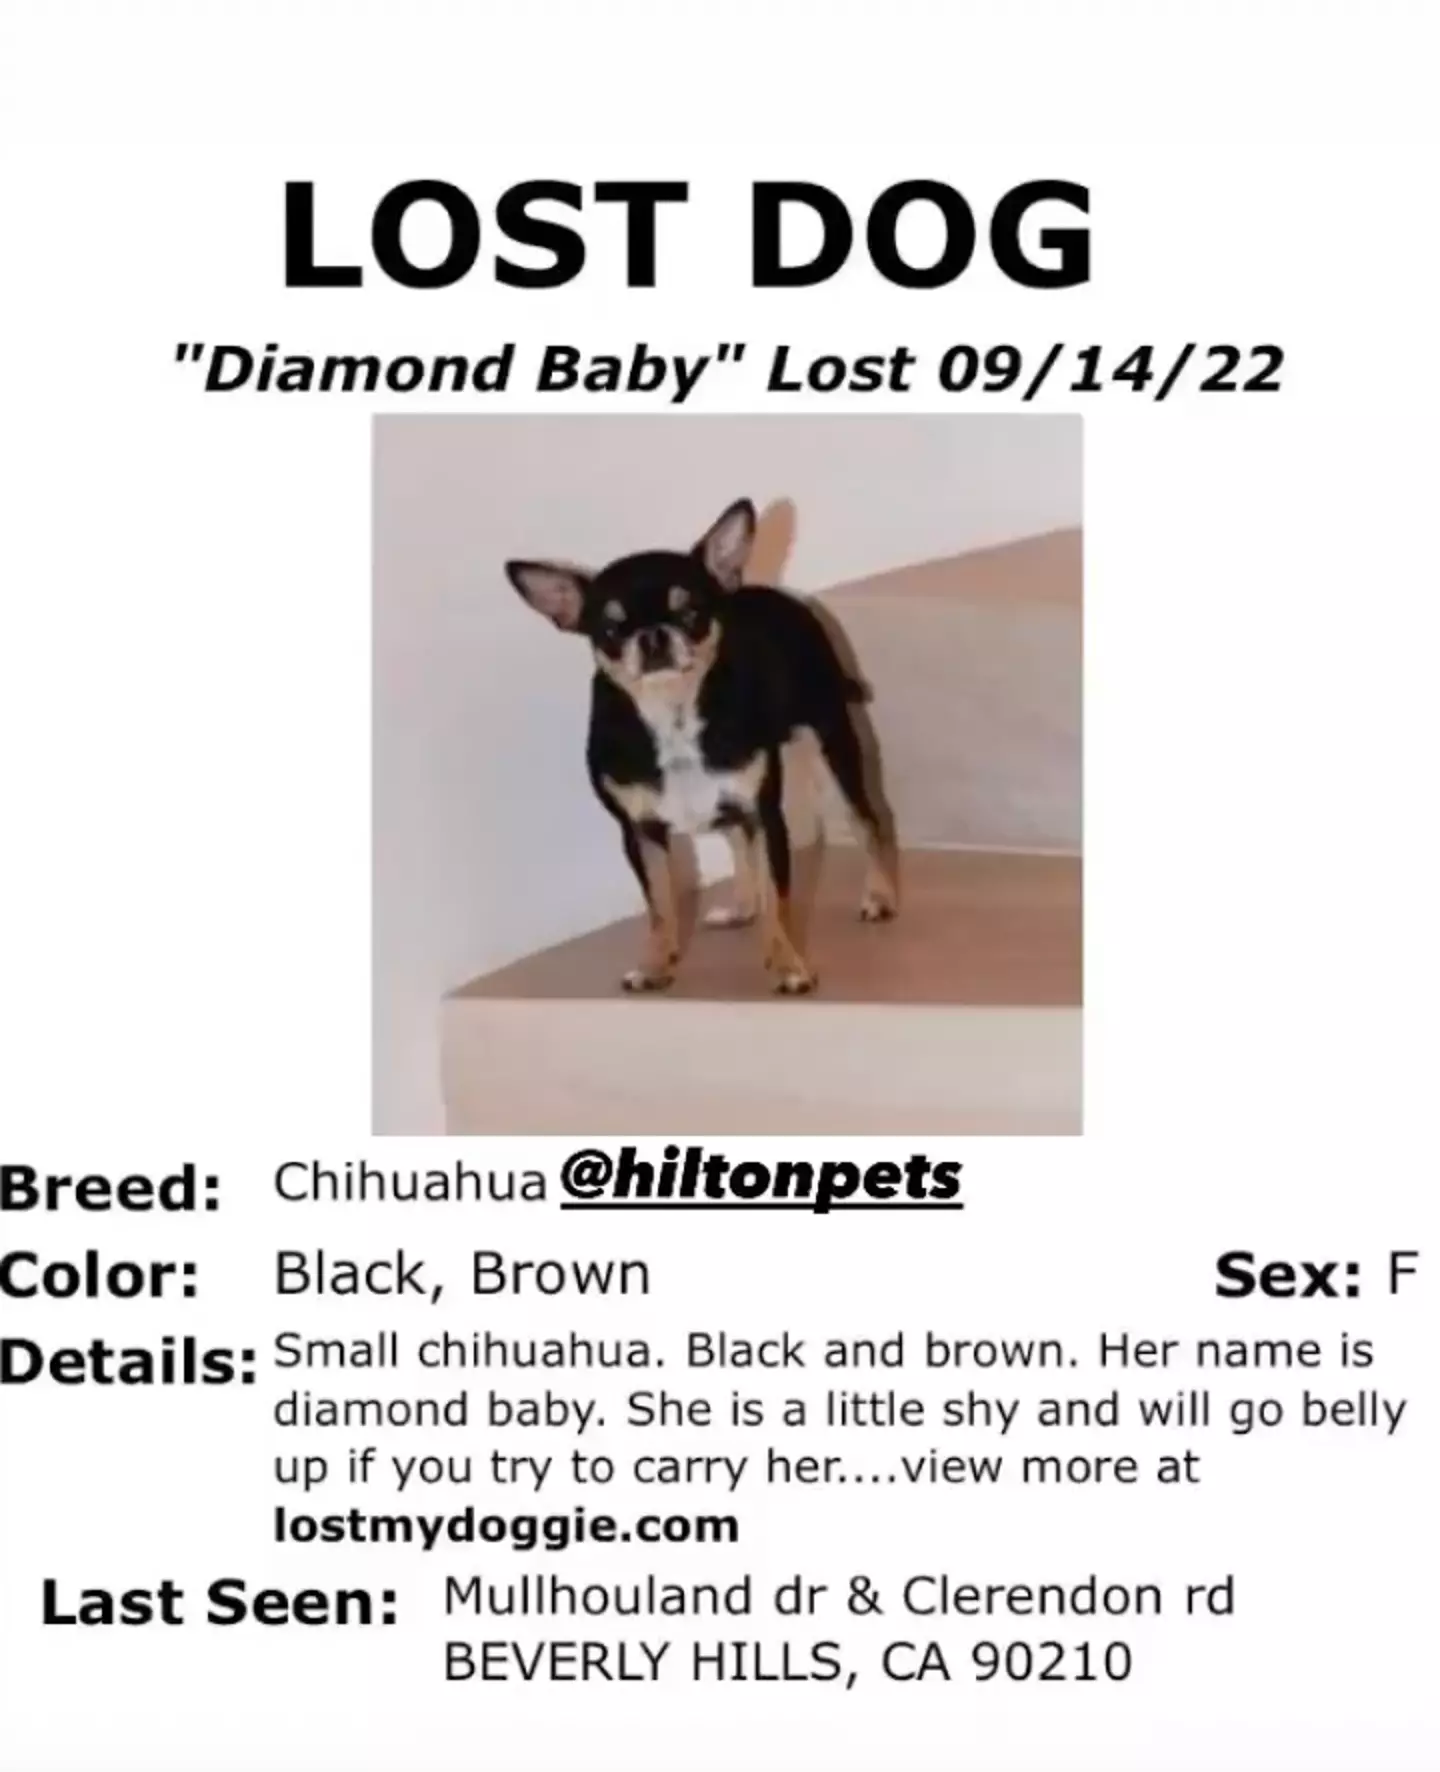 Paris is offering a reward for anyone who can locate her missing pooch.